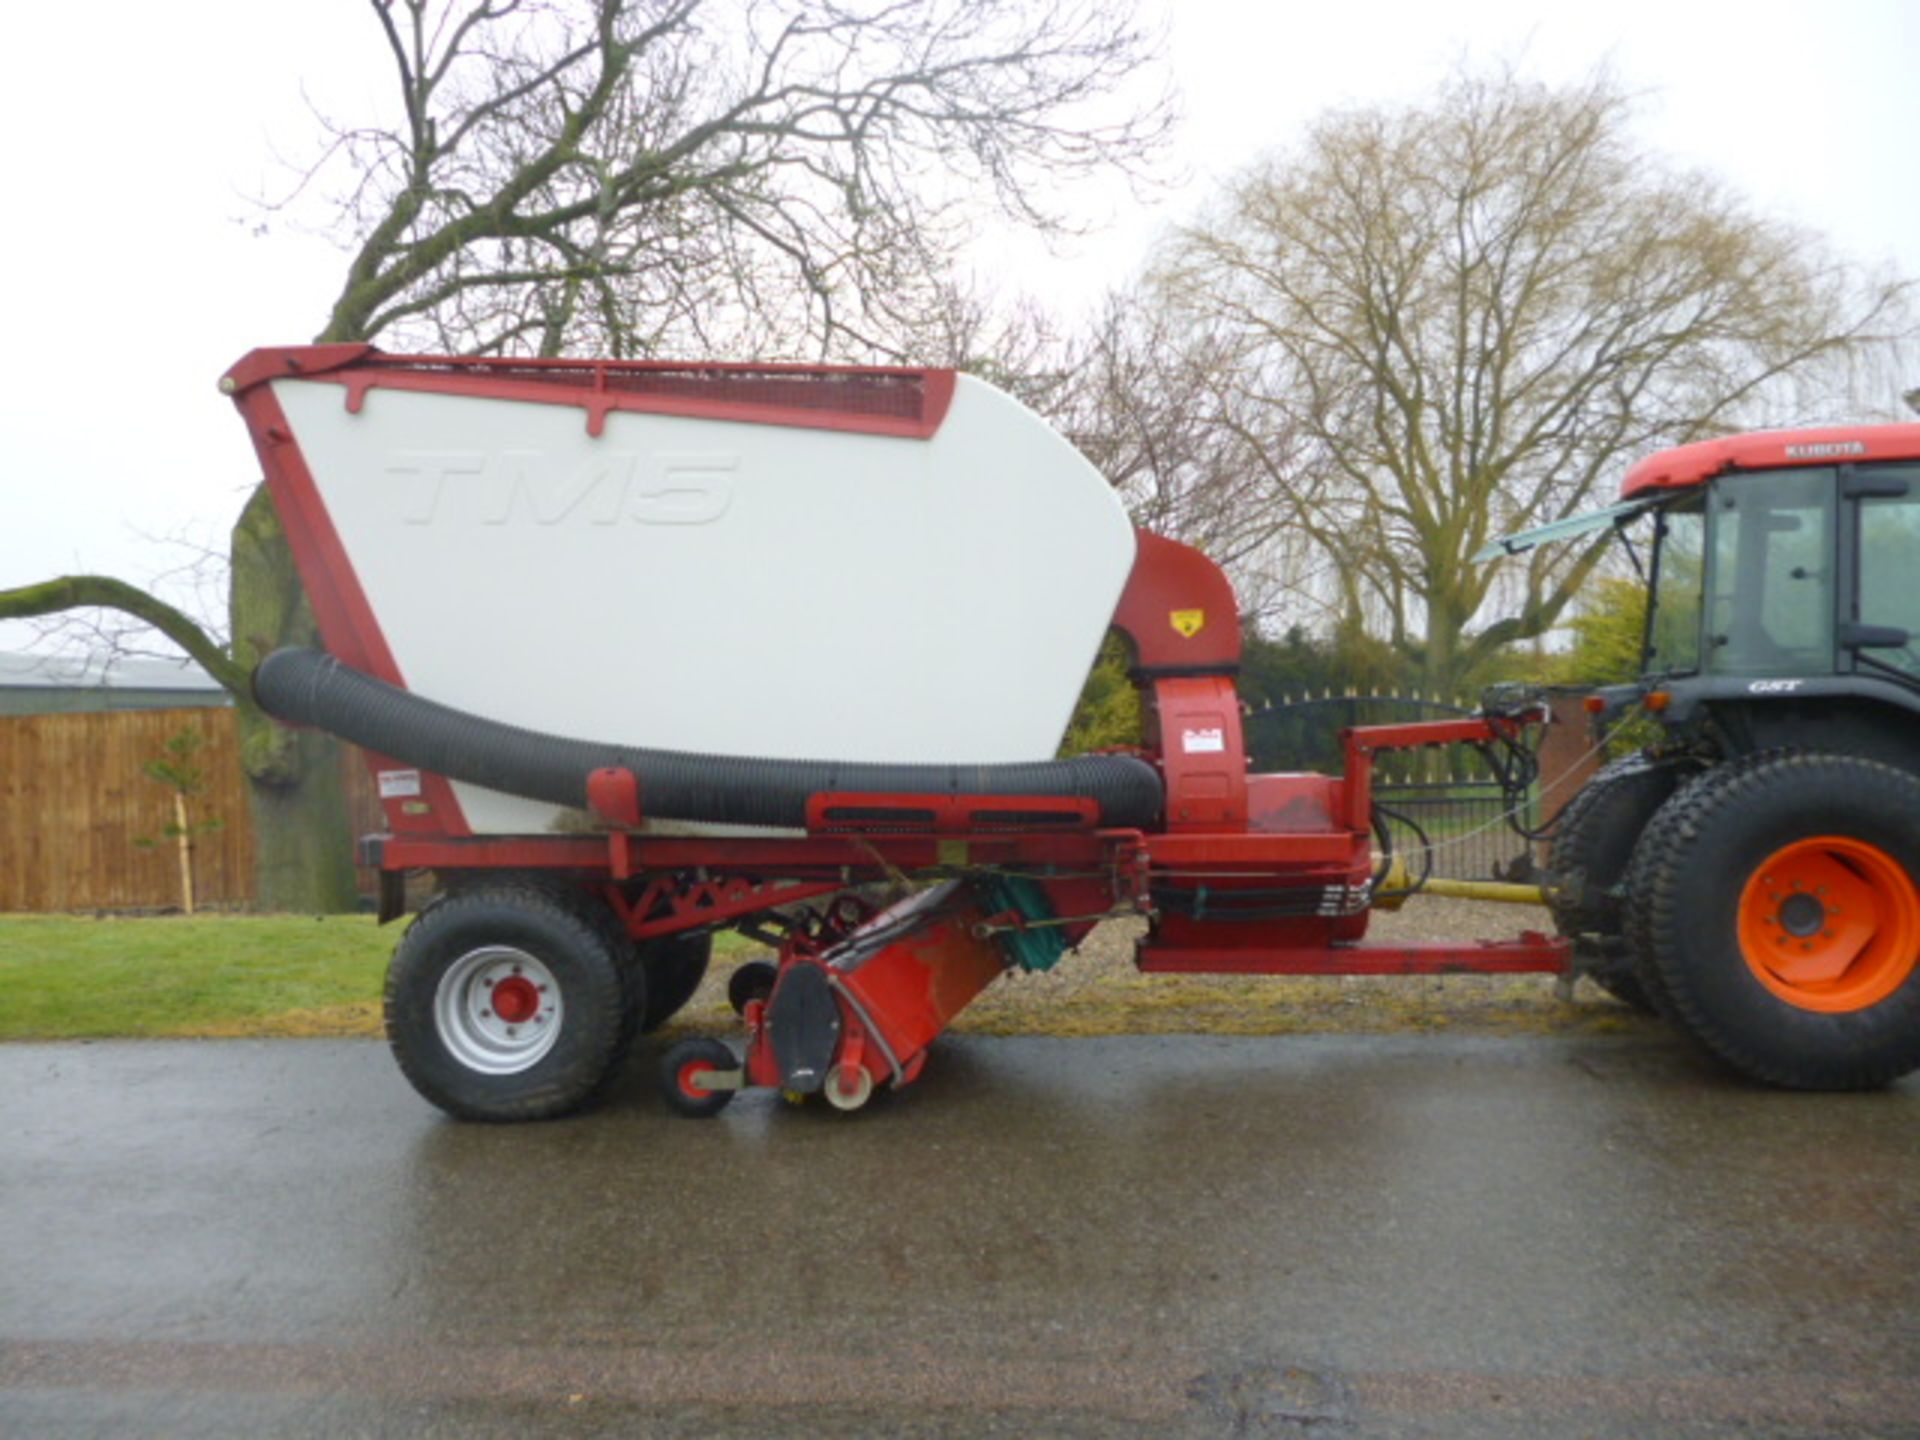 TURFMATCH TM5 VACUUM SWEEPER - YEAR 2008 TRACTOR TRAILED SWEEPER VACUUM.